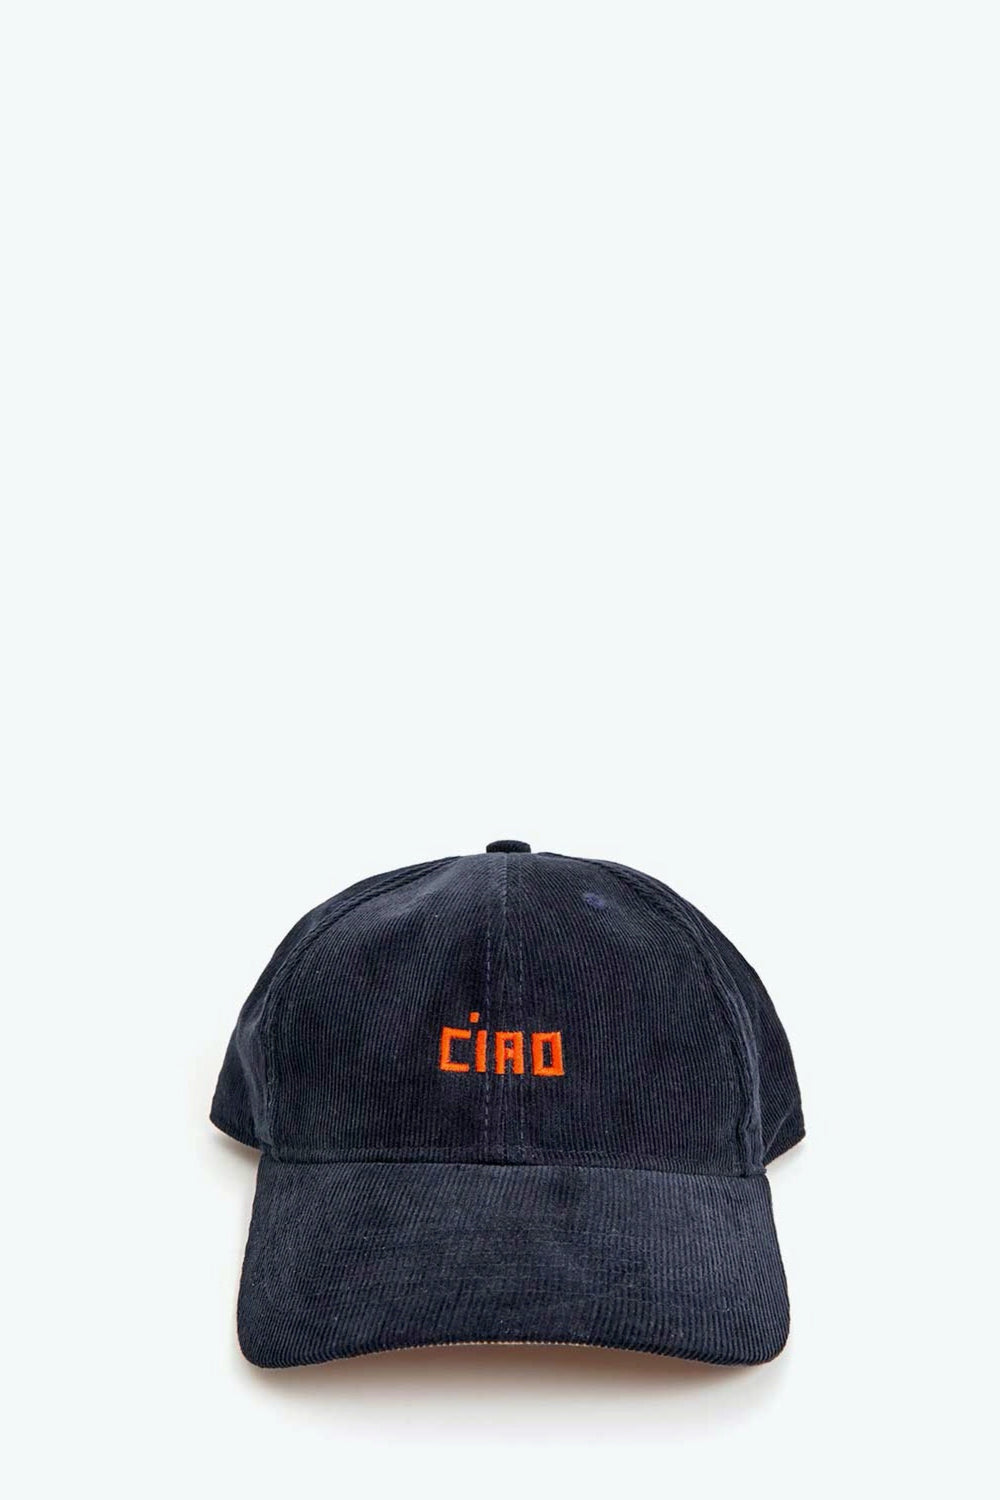 Navy Corduroy Ciao Hat